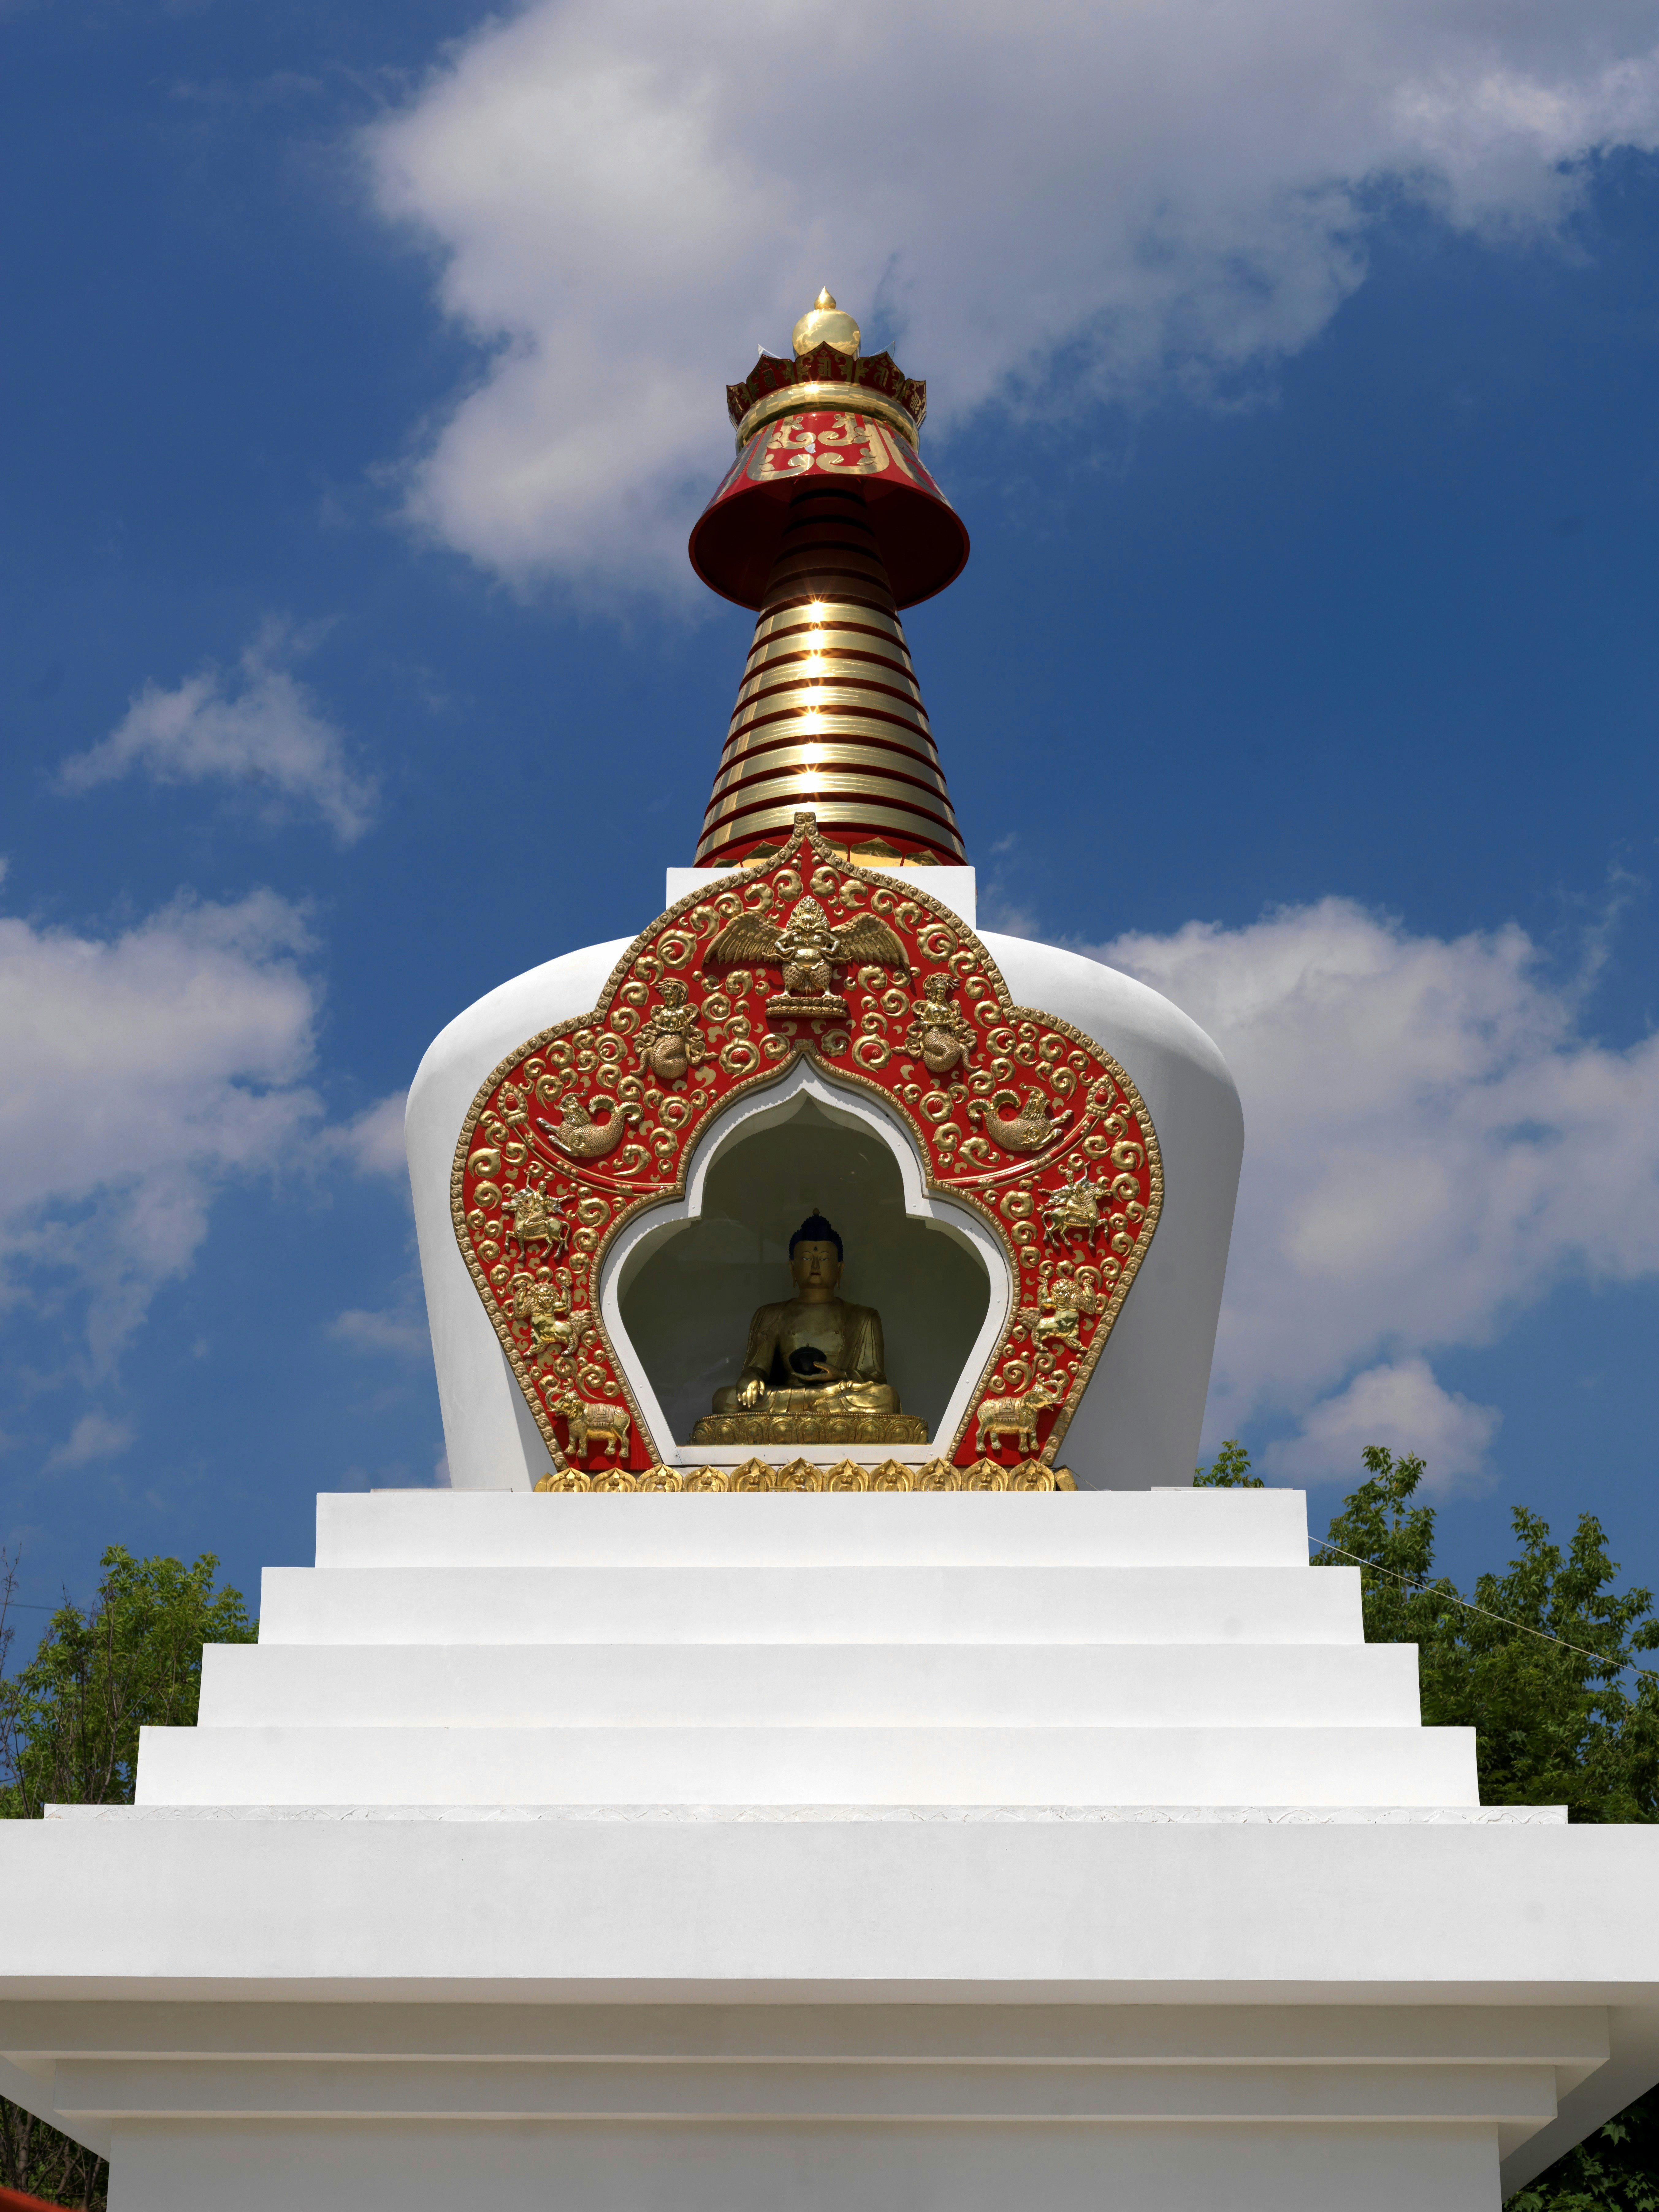 #misura_photos #misuraphotos https://www.youtube.com/user/Moscowartgallery vk.com/scanart From the series #Spiritualcentersofmoscow Stupa of Enlightenment of the Thubden Shedubling Temple Complex if you like my works, I have more on my profile page - Please check them out! Don't forget to subscribe, press a like button, add my photo to your collections, share it with your friends and download it if you like! See you!